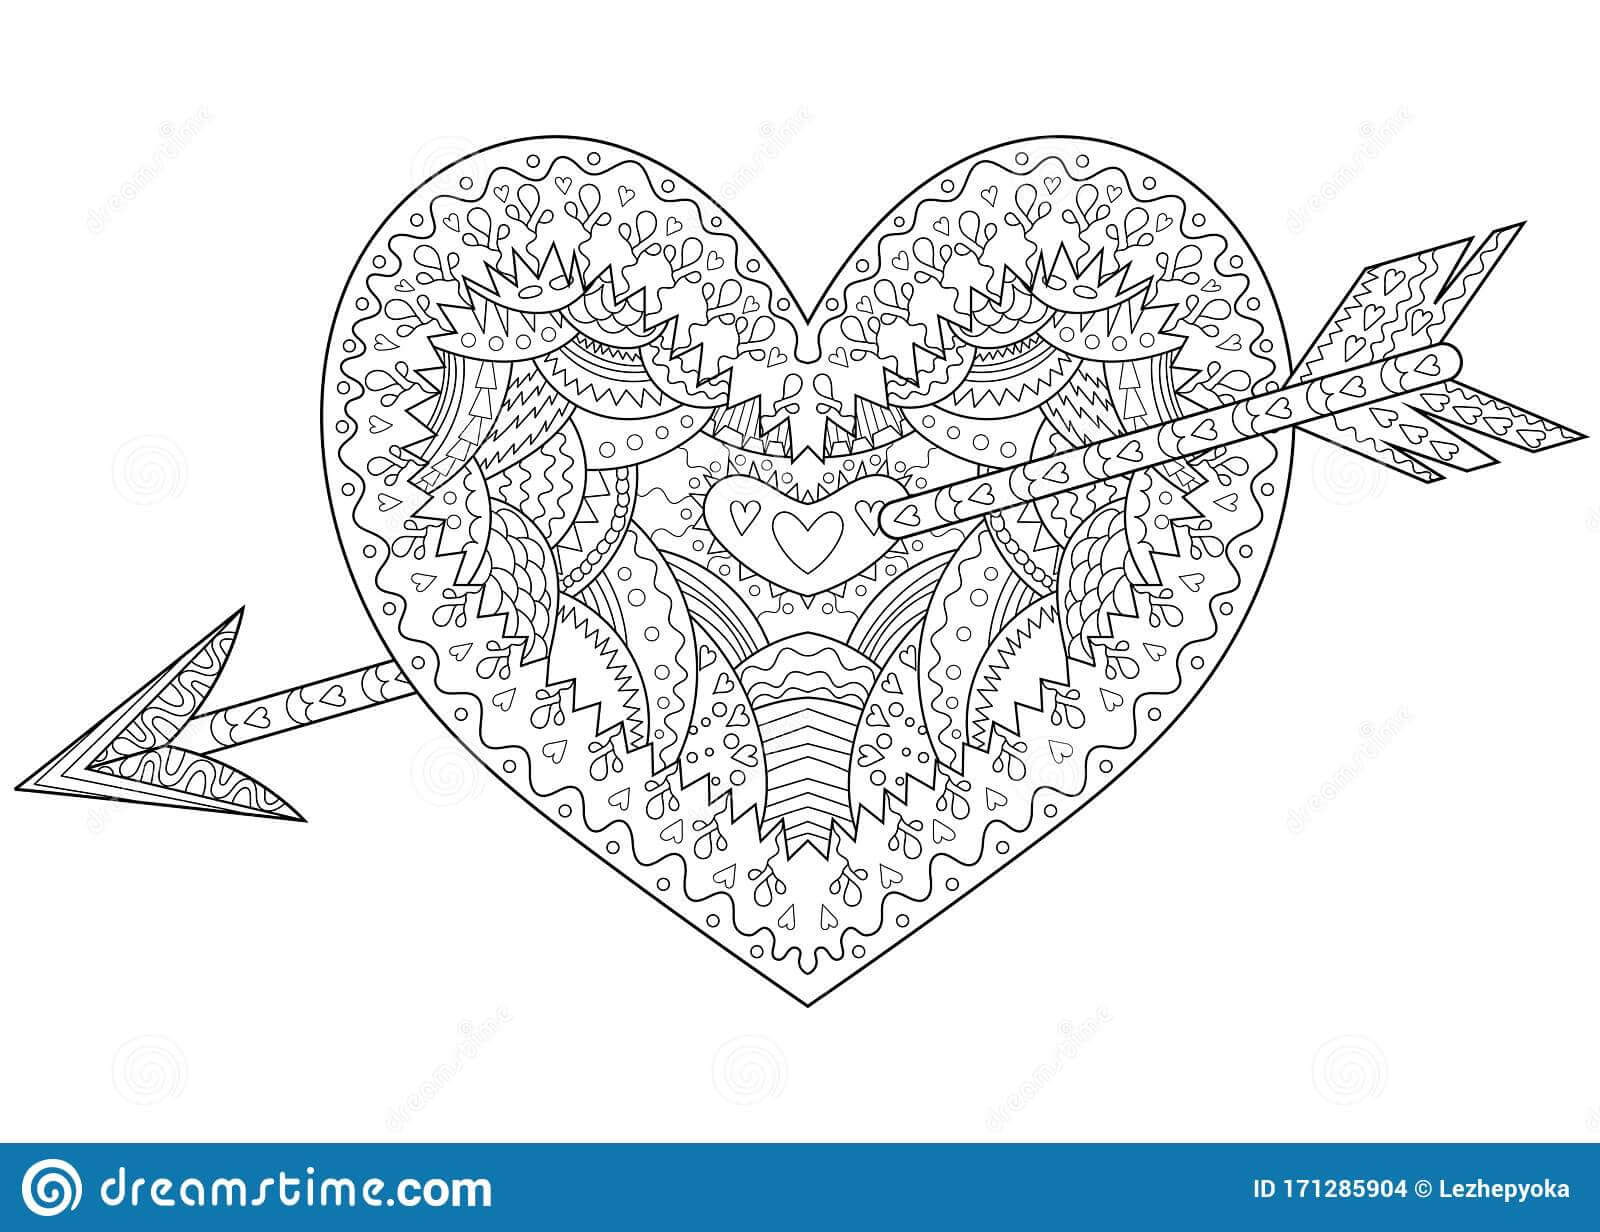 heart coloring pages anatomy | heart coloring pages for toddlers | heart coloring pages for adults printable